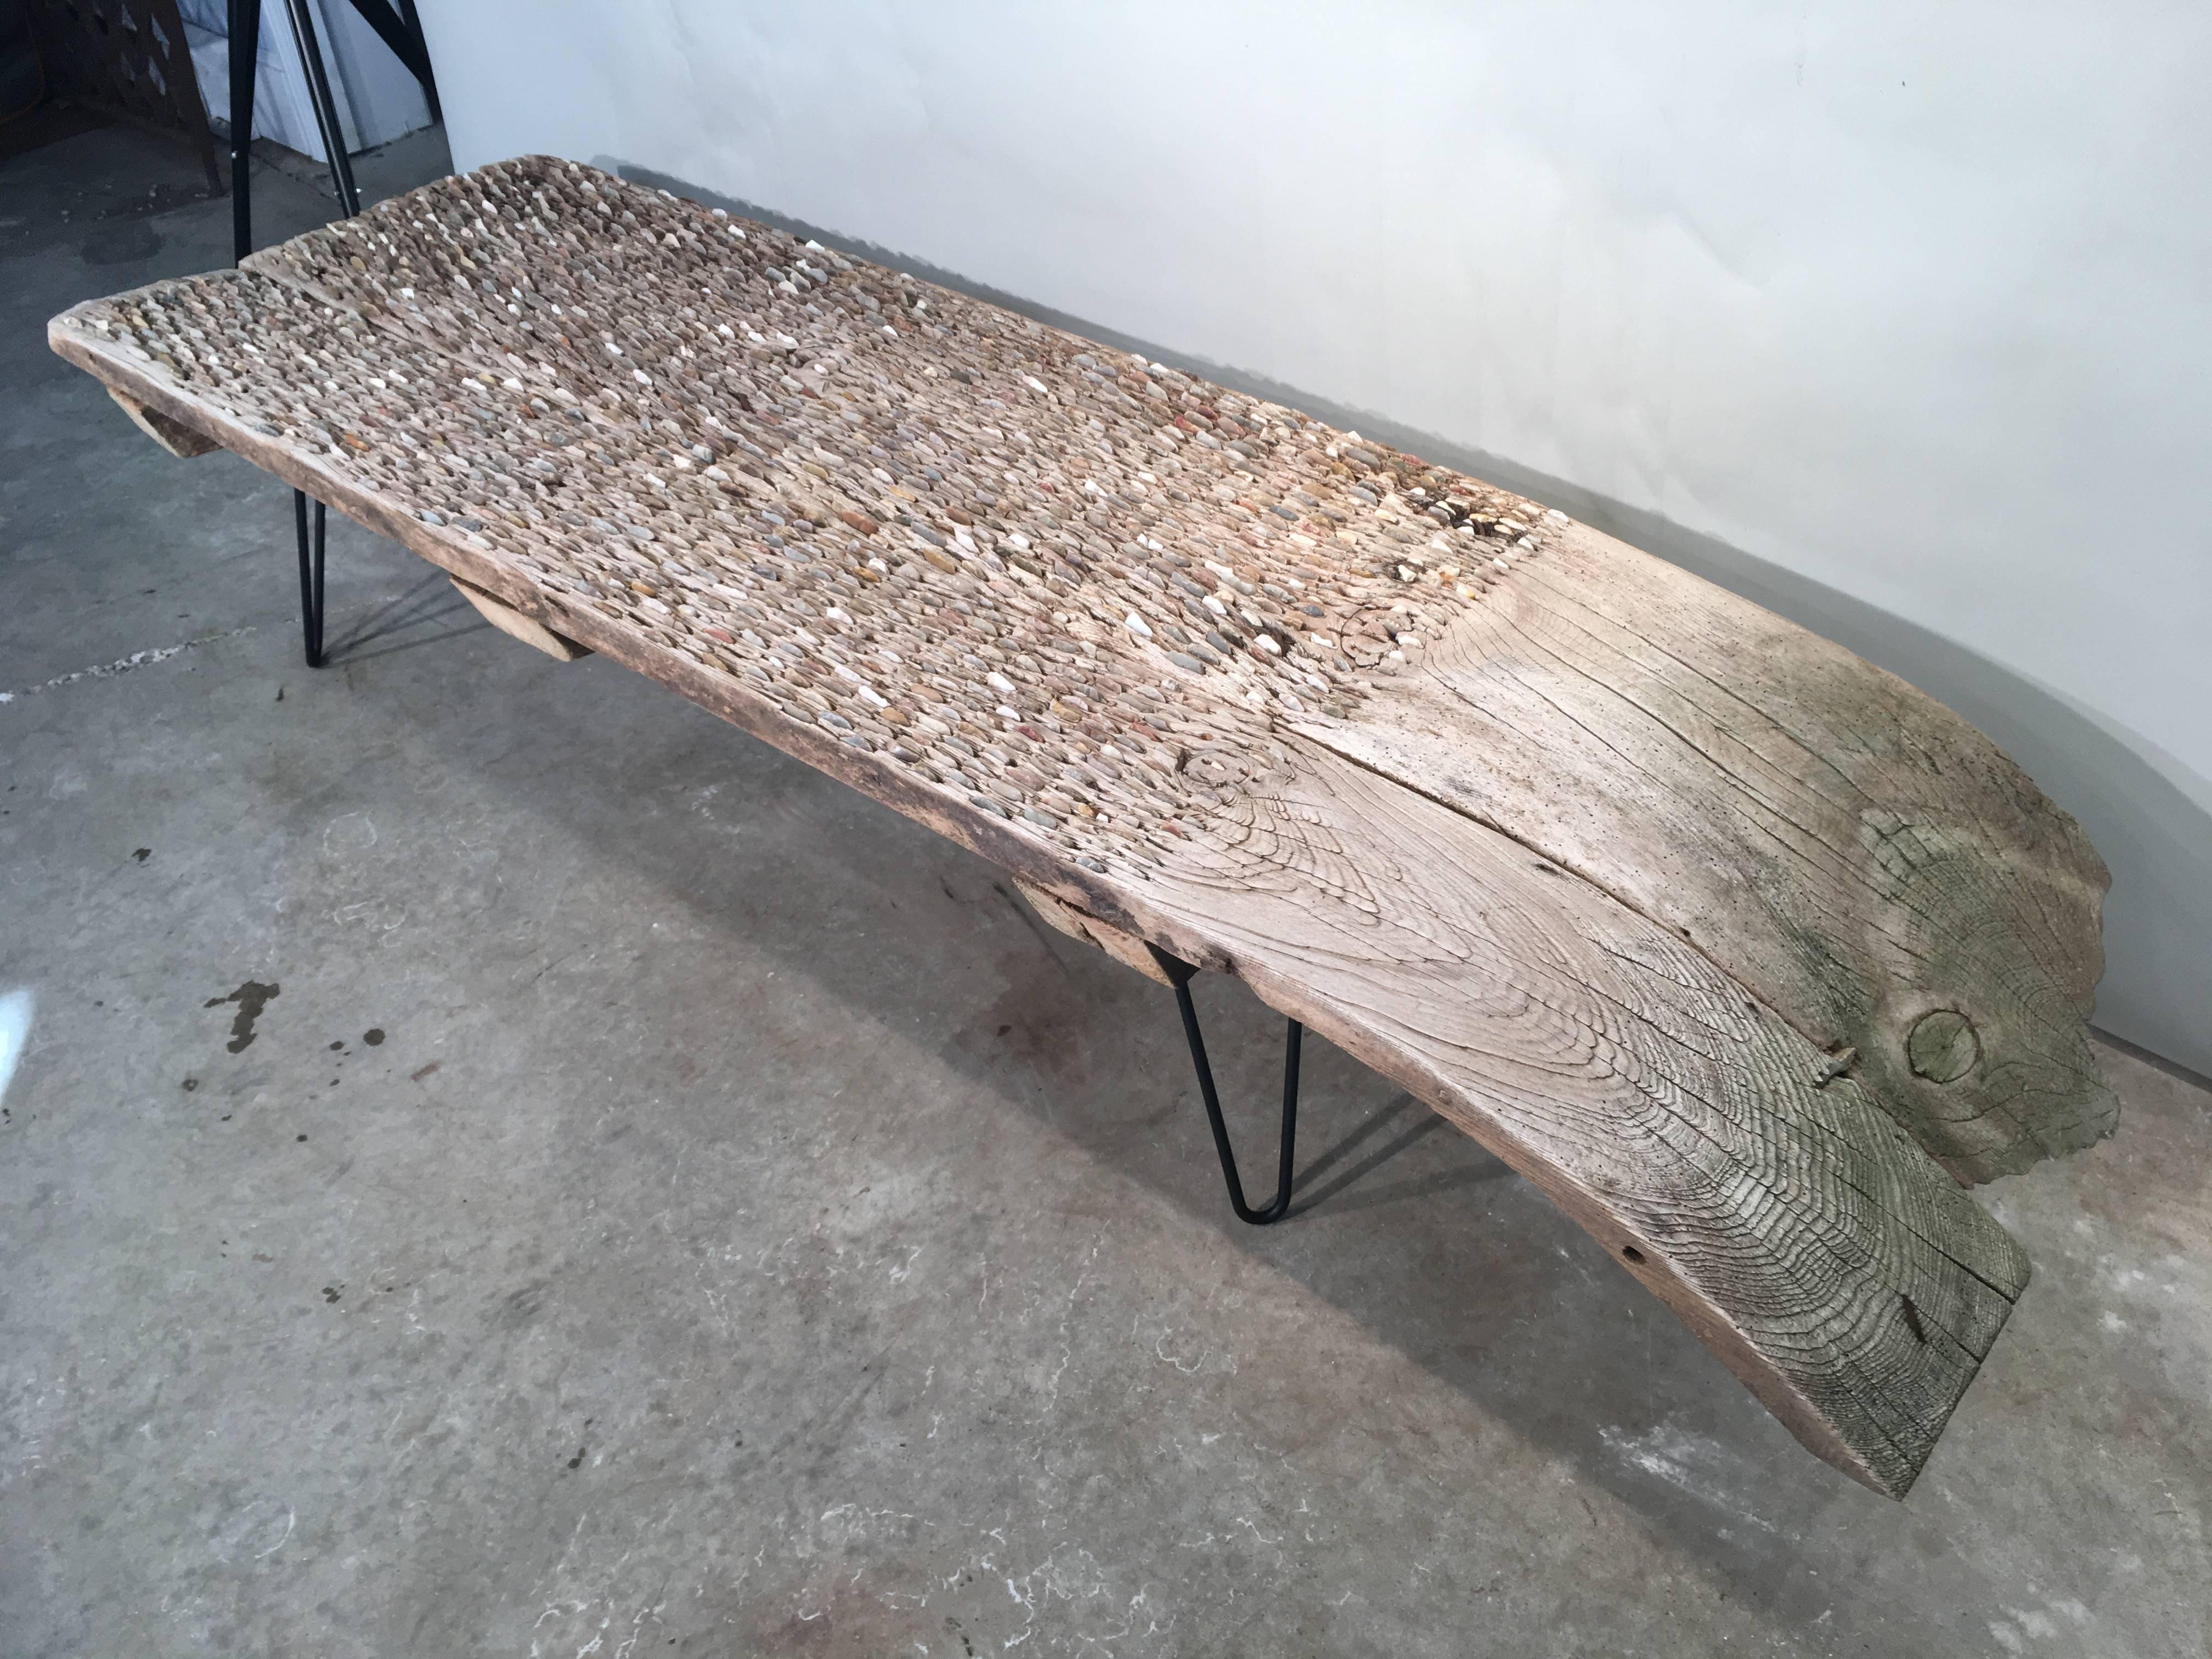 A tribulum is an ancient hand-made threshing board, inlaid with chips of flint or stone, that has been used since Roman times to separate grains from the chaff. We were fortunate enough to score two of these coffee tables, this one in a lovely pale